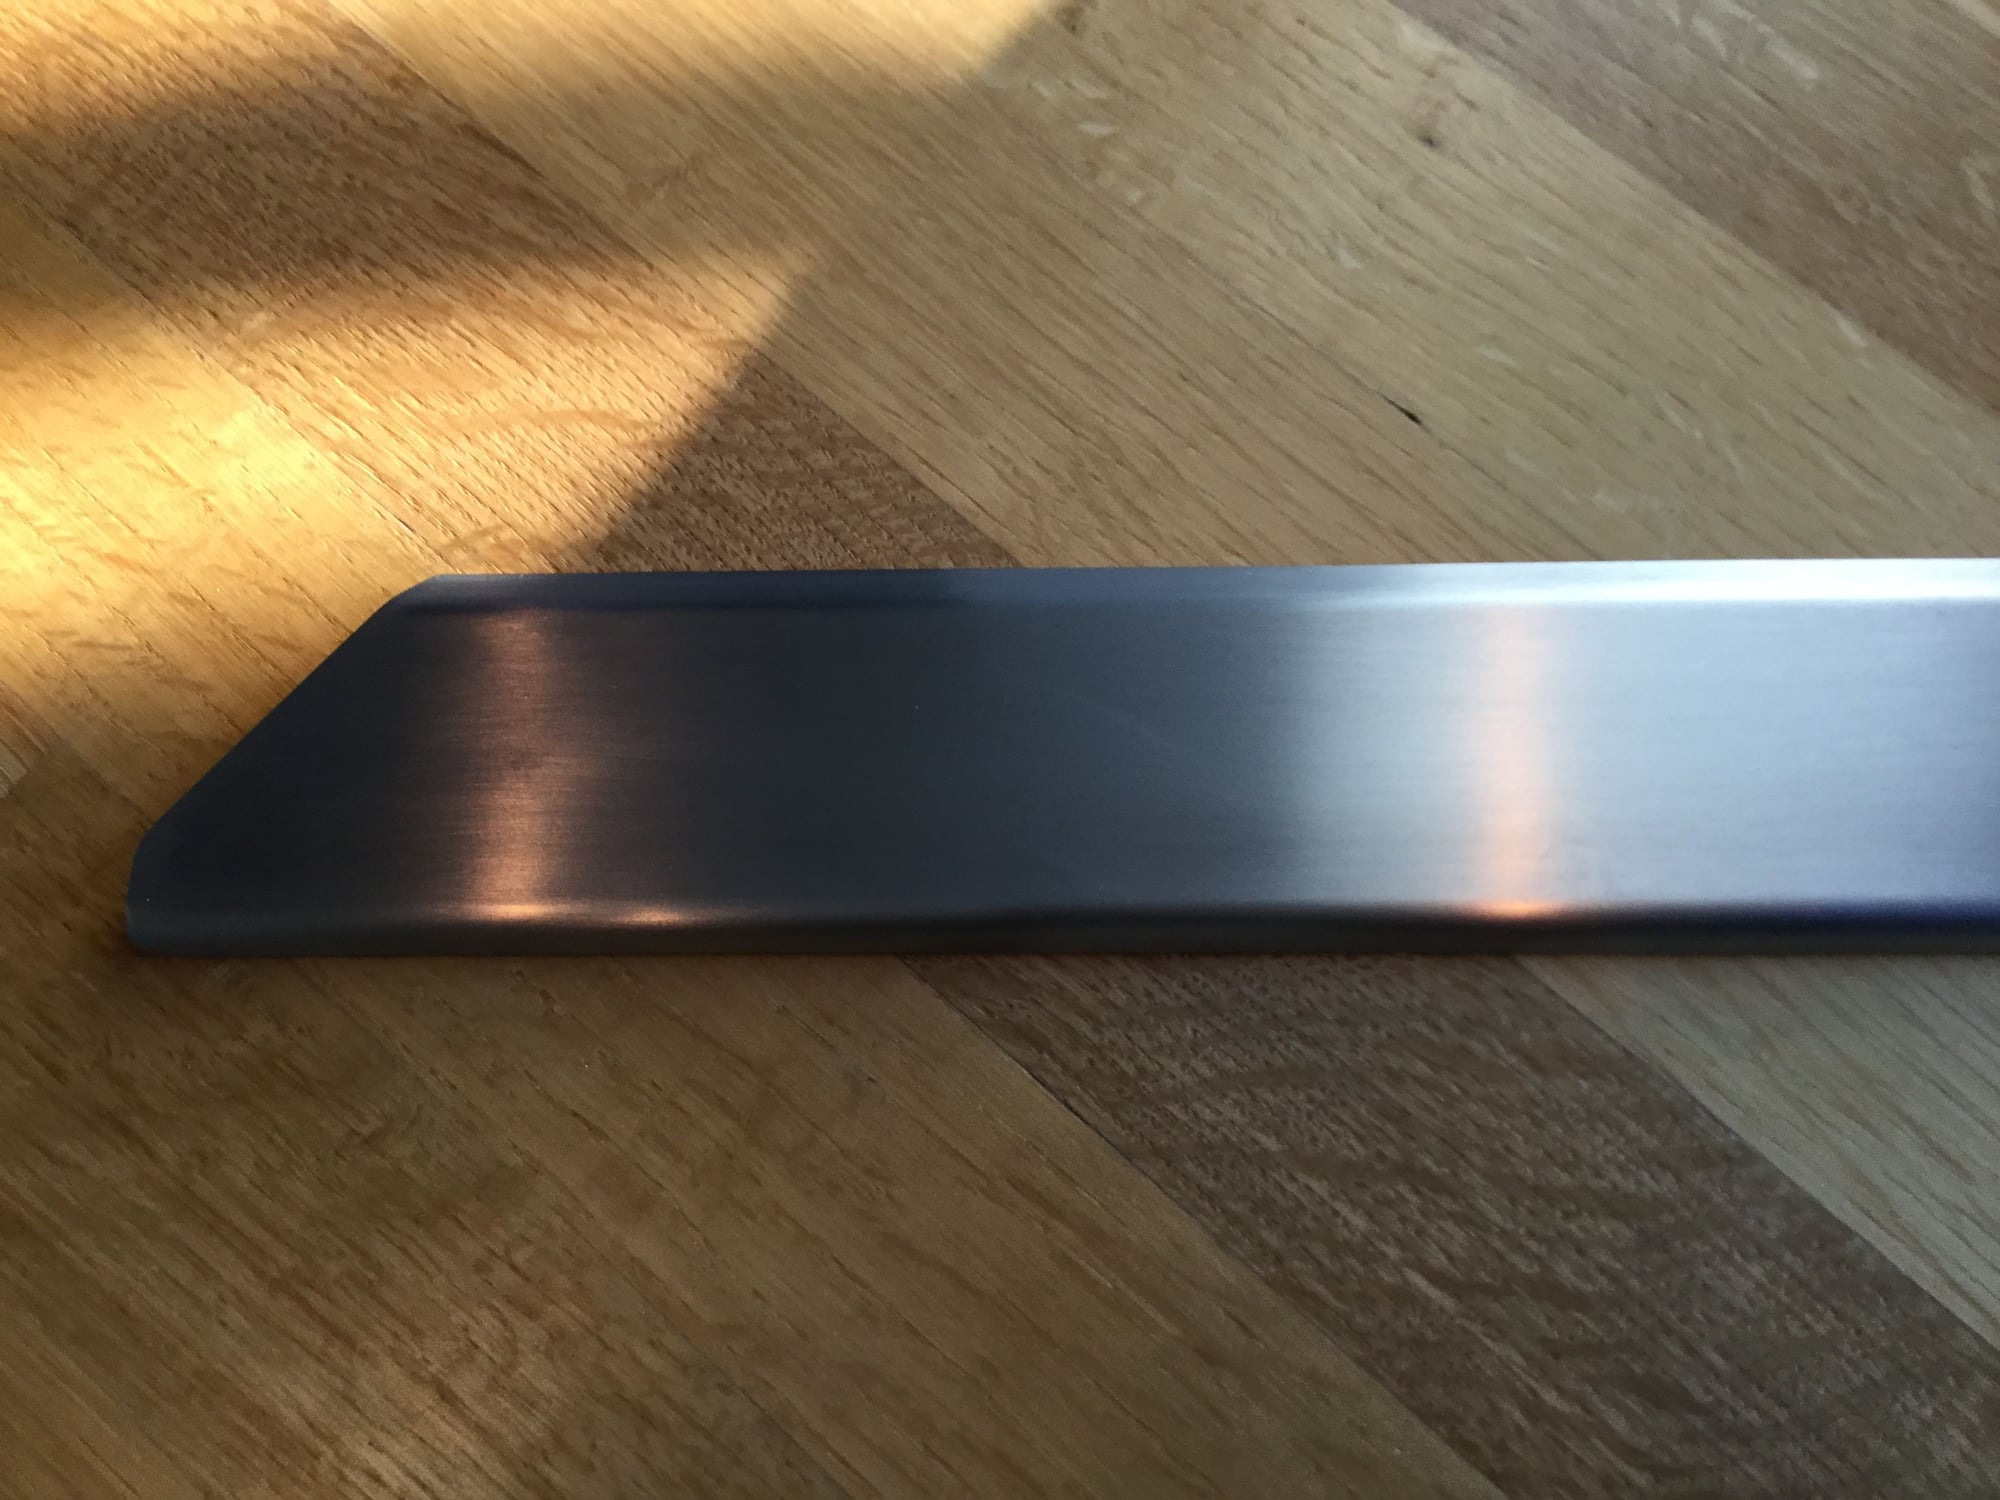 Accessories - CARRERA 4 DOOR SILL FACTORY STAINLESS STEEL DRIVER SIDE - Used - All Years Porsche 911 - Piedmont, CA 94611, United States